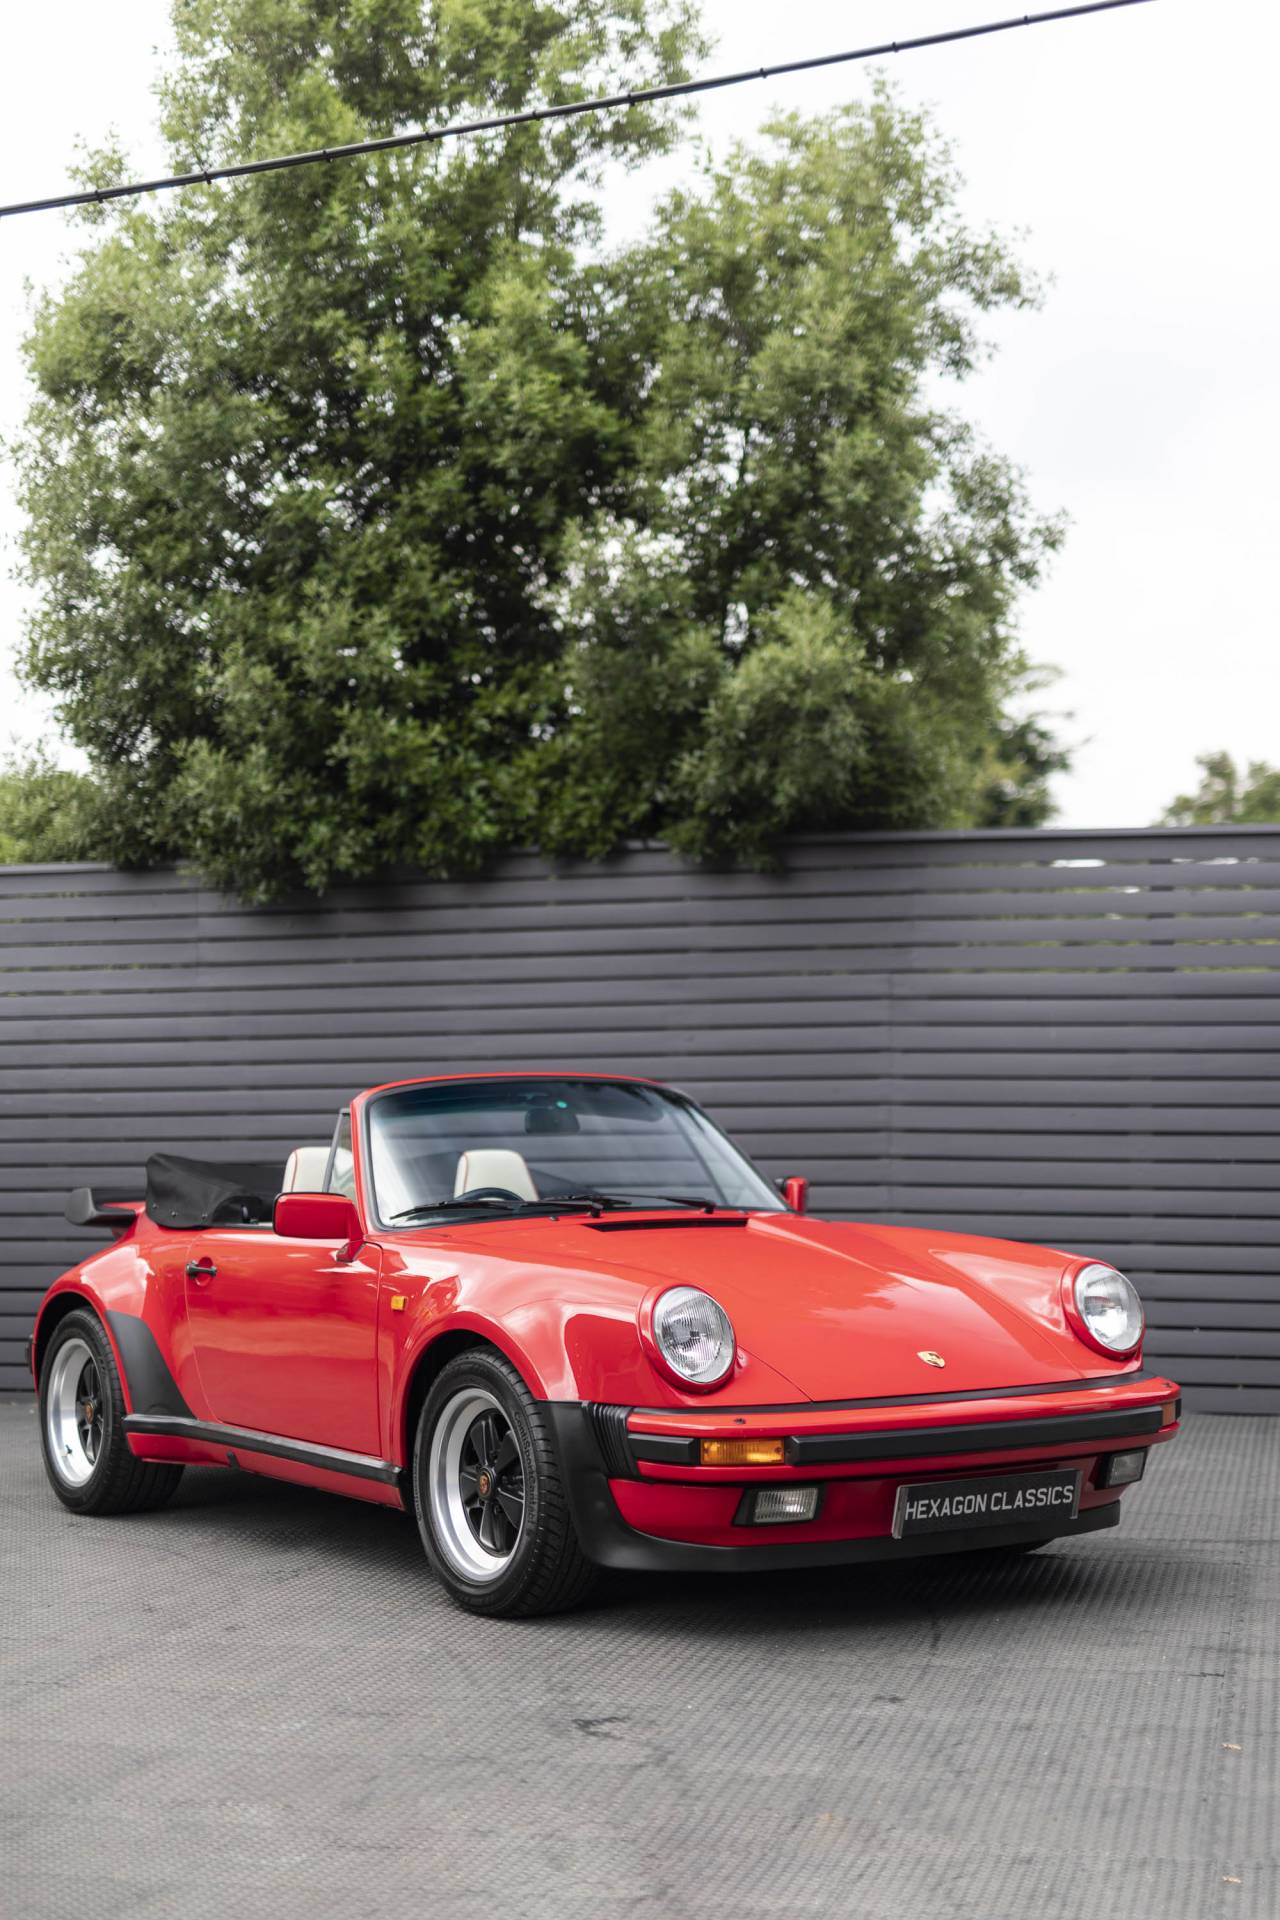 For Sale: Porsche 911 Carrera  (WTL) (1989) offered for GBP 94,995